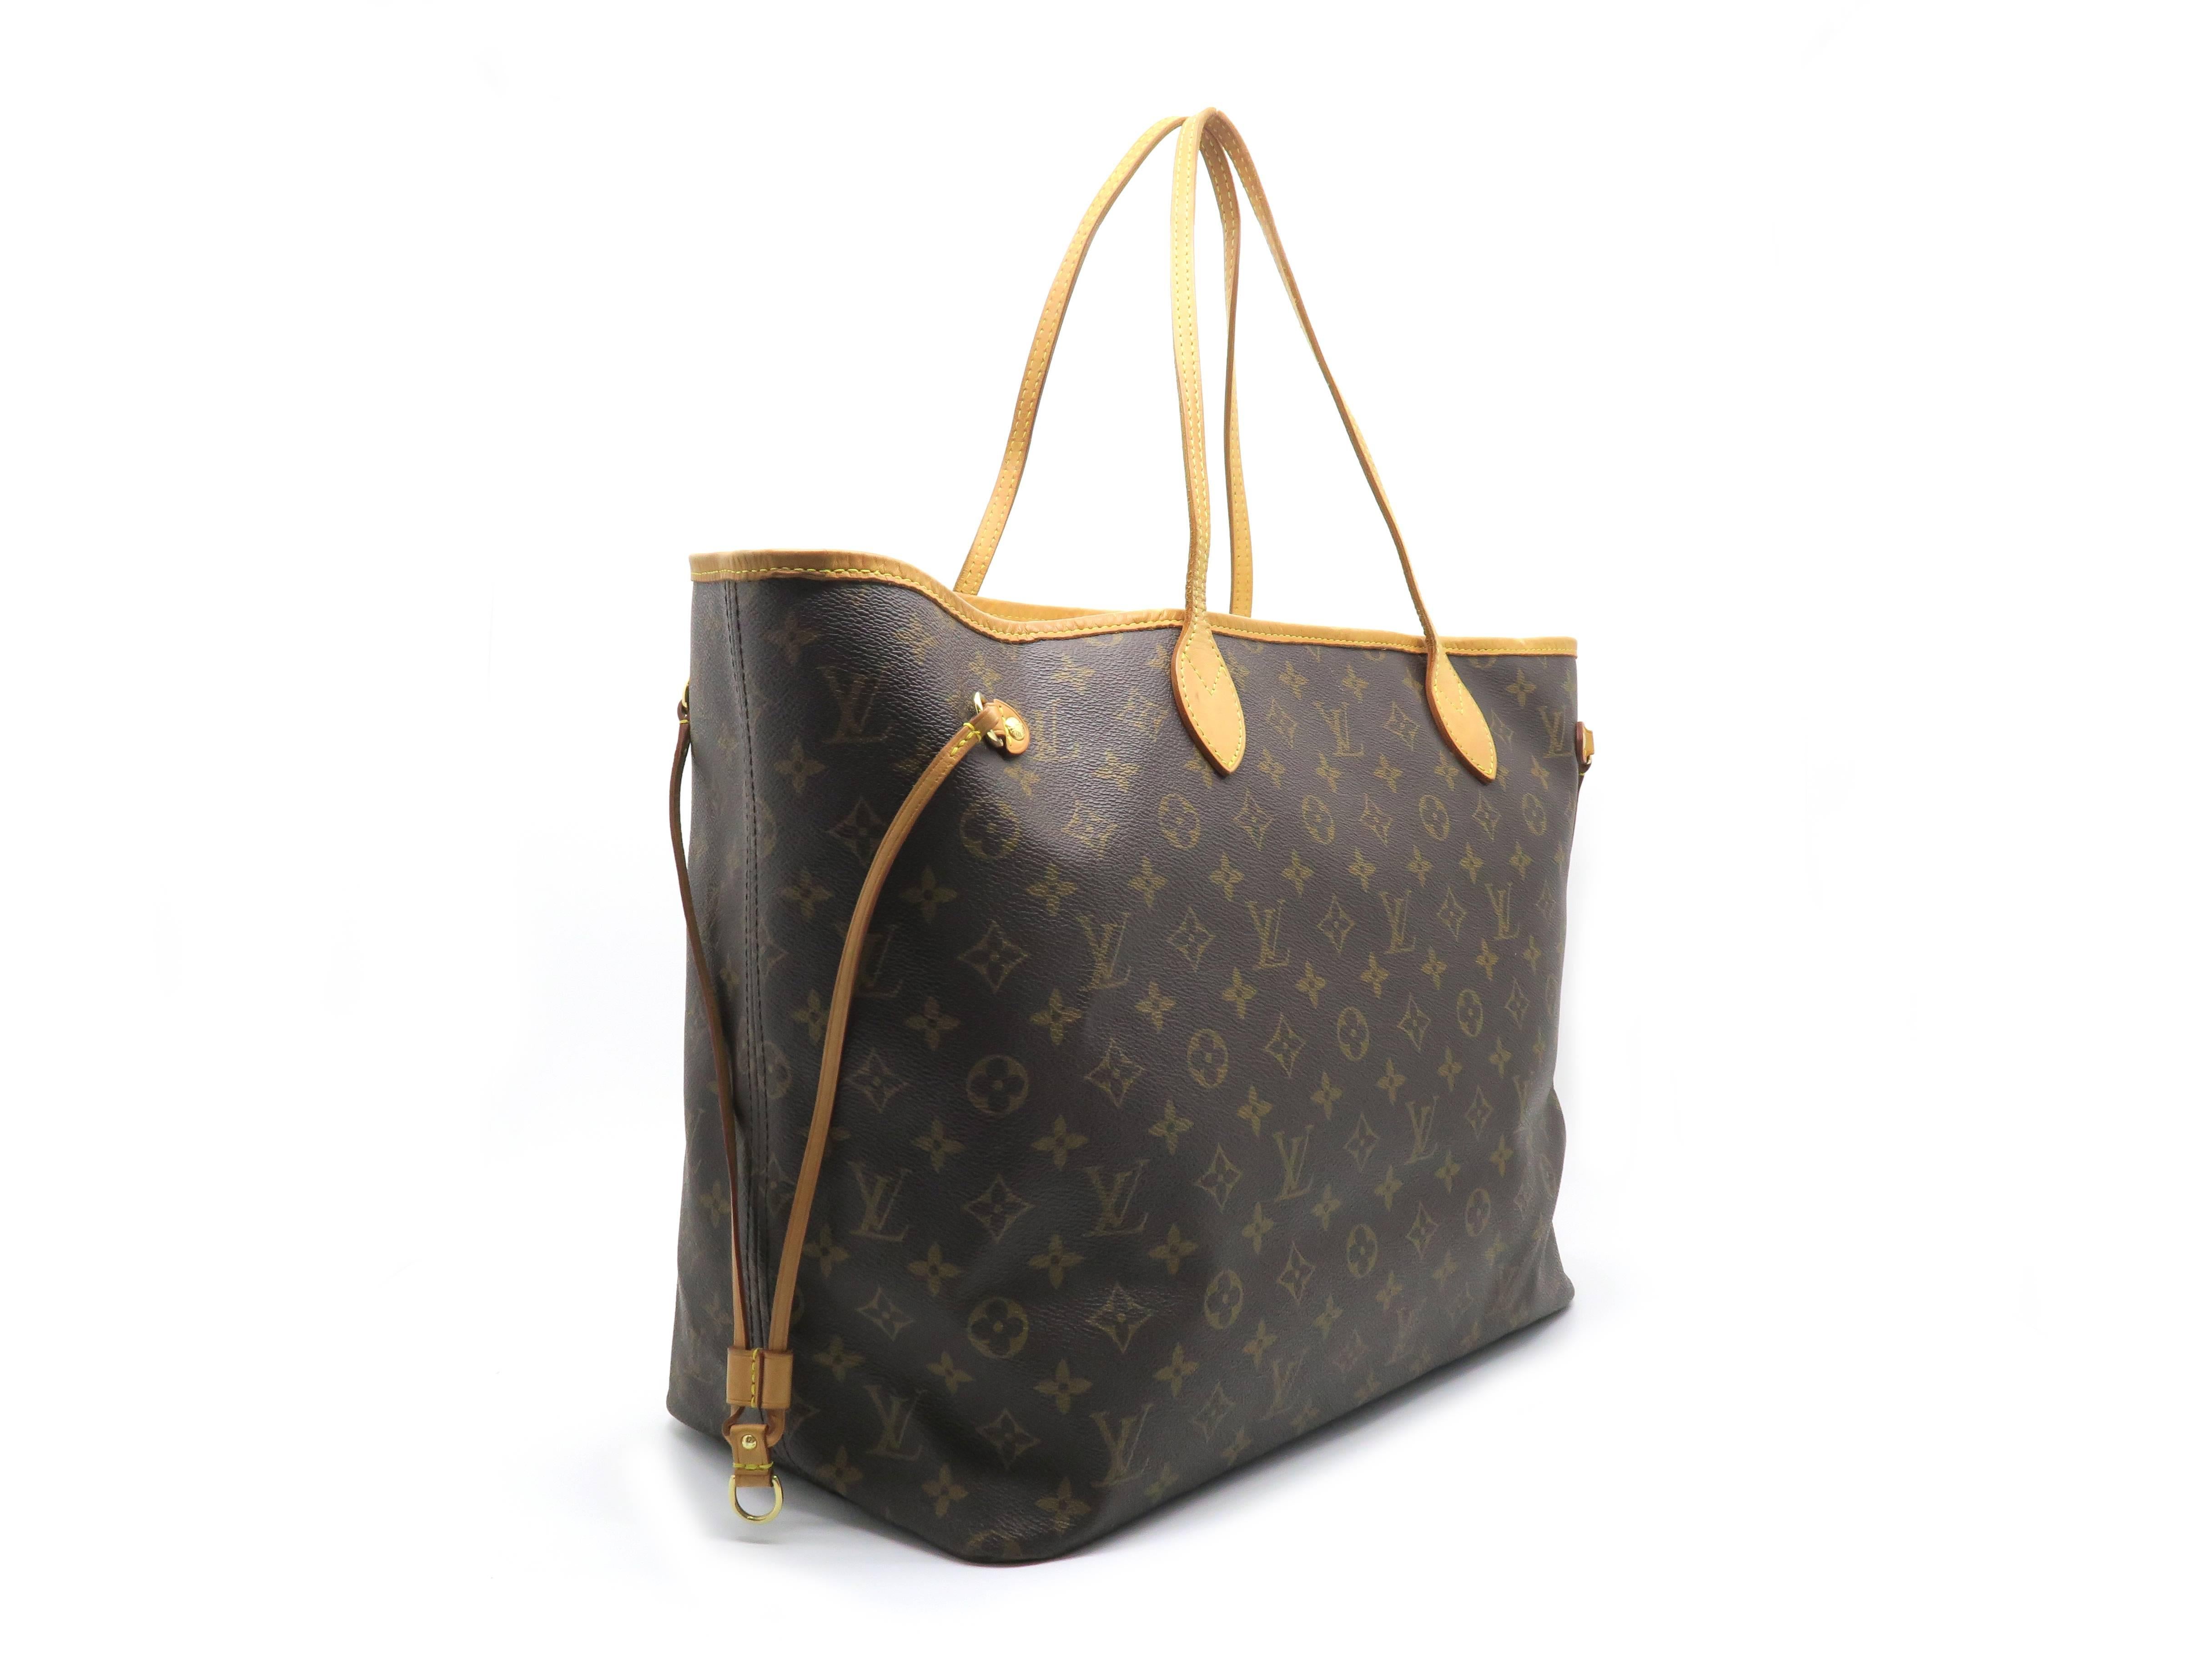 Color: Brown

Material: Monogram Canvas

Condition: Rank A
Overall: Good, few minor defects
Surface: Minor Scratches
Corners: Minor Scratches
Edges: Minor Scratches
Handles/Strap: Minor Scratches
Hardware: Minor Scratches

Dimensions: